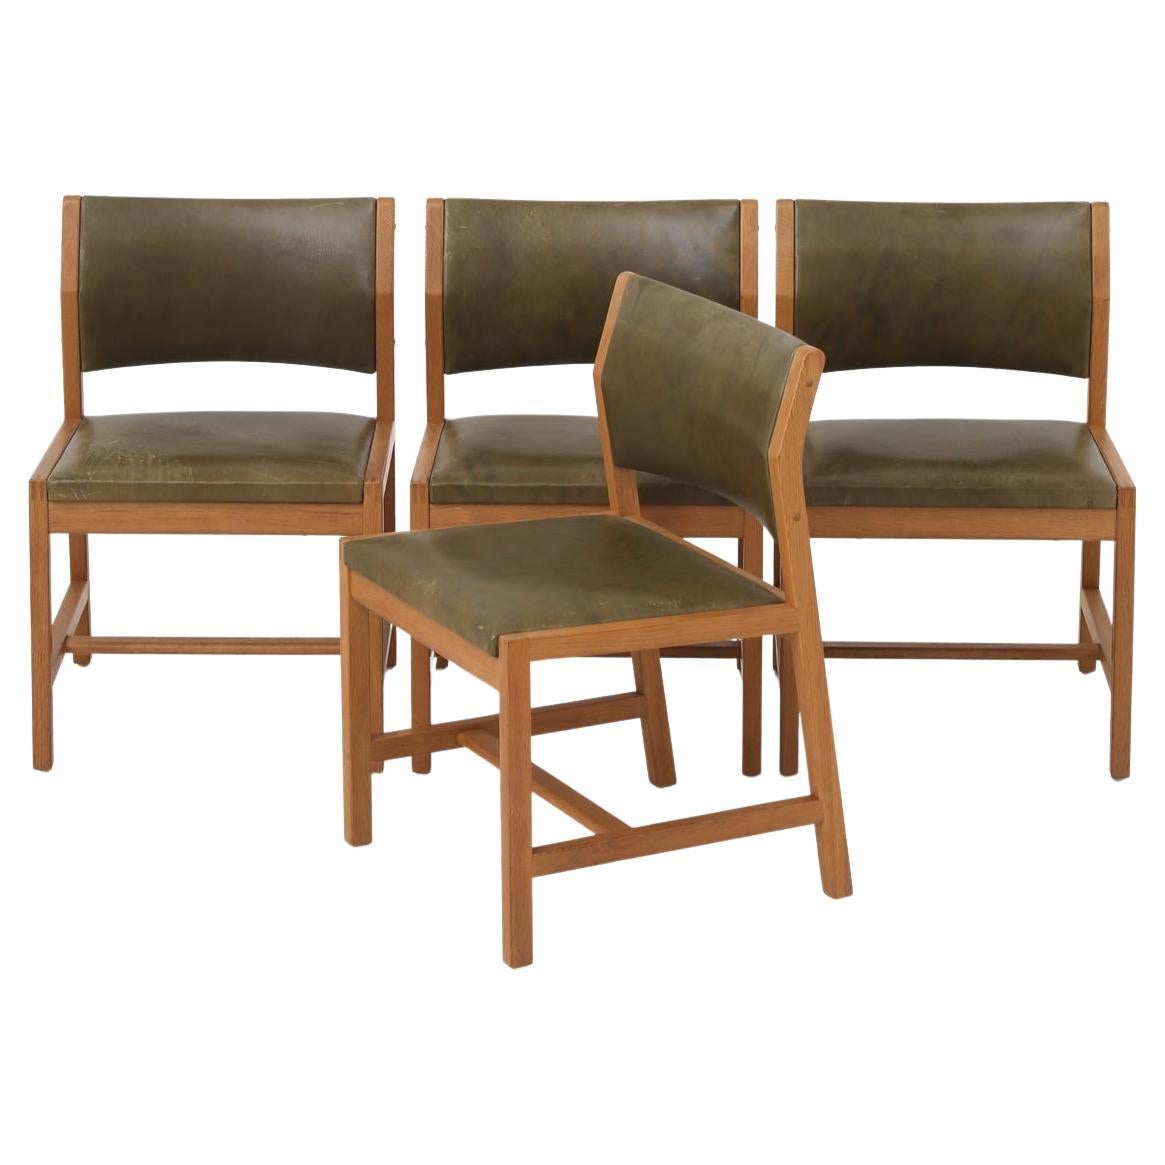 Set of Four BM 72 Chairs by Børge Mogensen